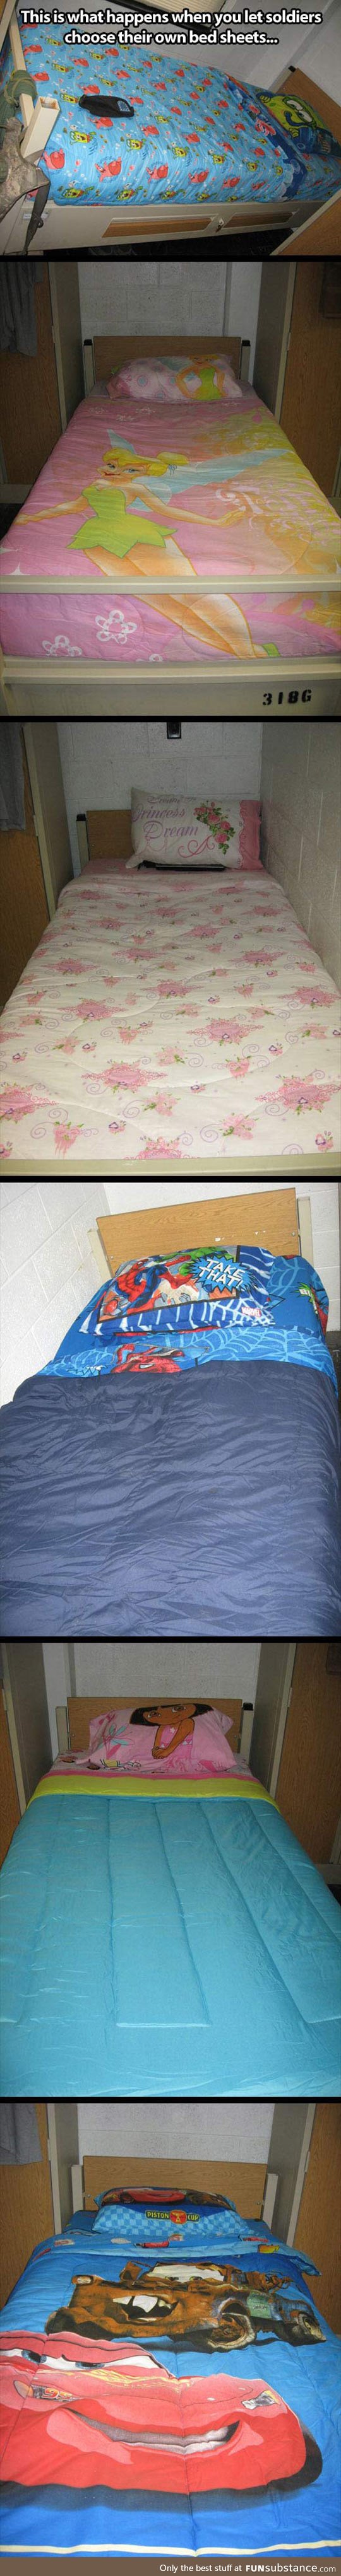 When you let soldiers choose their own bed sheets